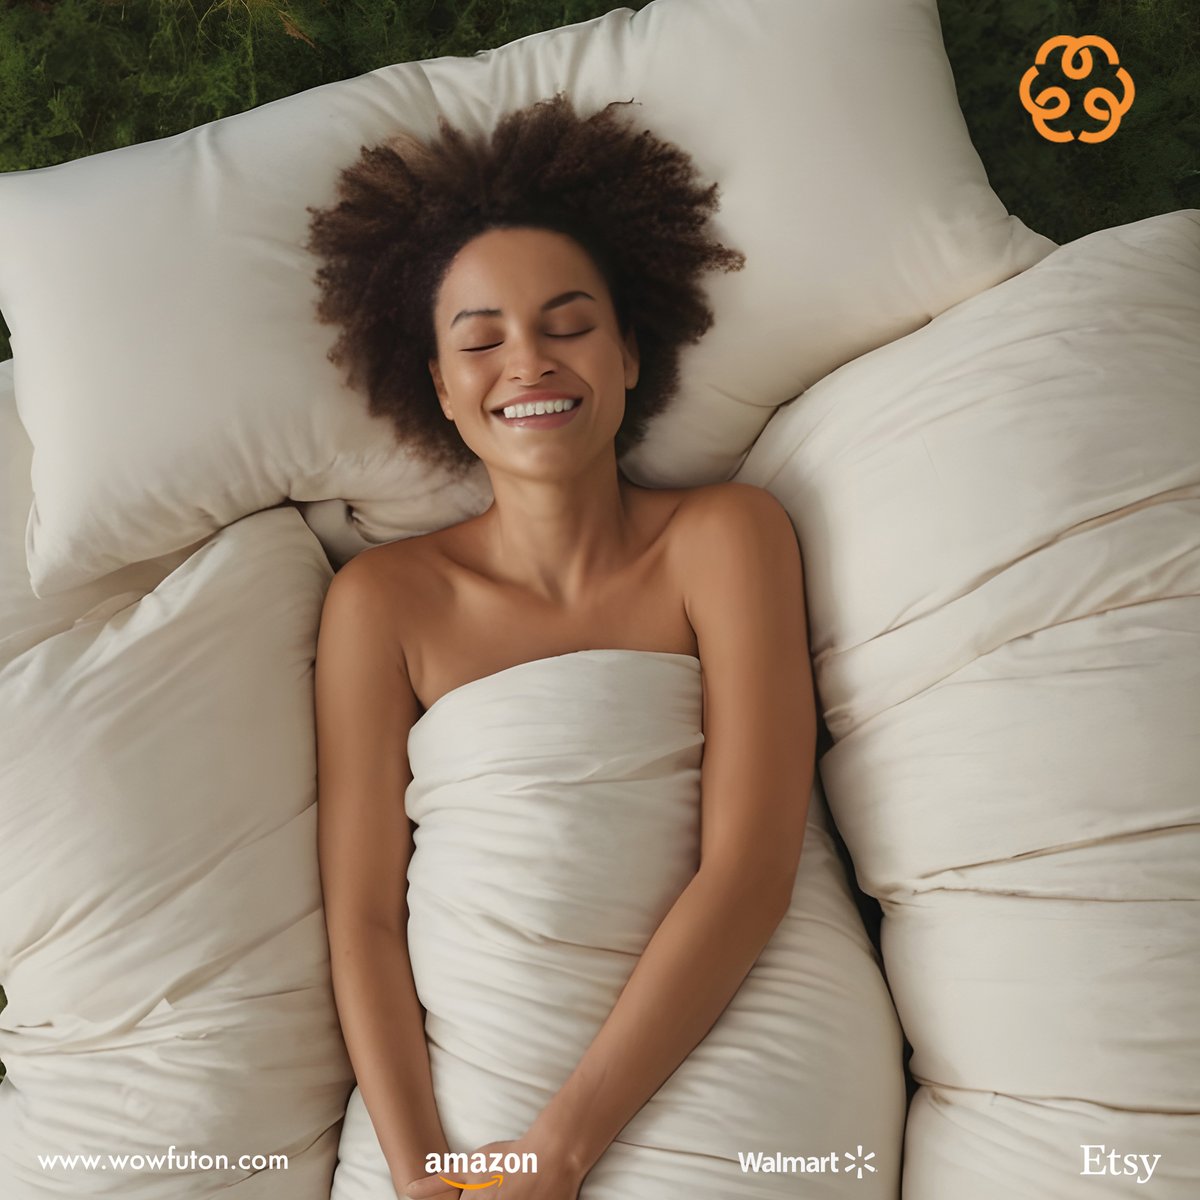 💤 Enjoy the most organic and modern sleep experiences to your heart's content. feel it. The privilege of organic fibers, from cotton to linen, from wool to bamboo. Discover more at WoWFuton.com

#wowfuton
#organicbedding
#organicsleep
#amazon
#wallmart
#etsy